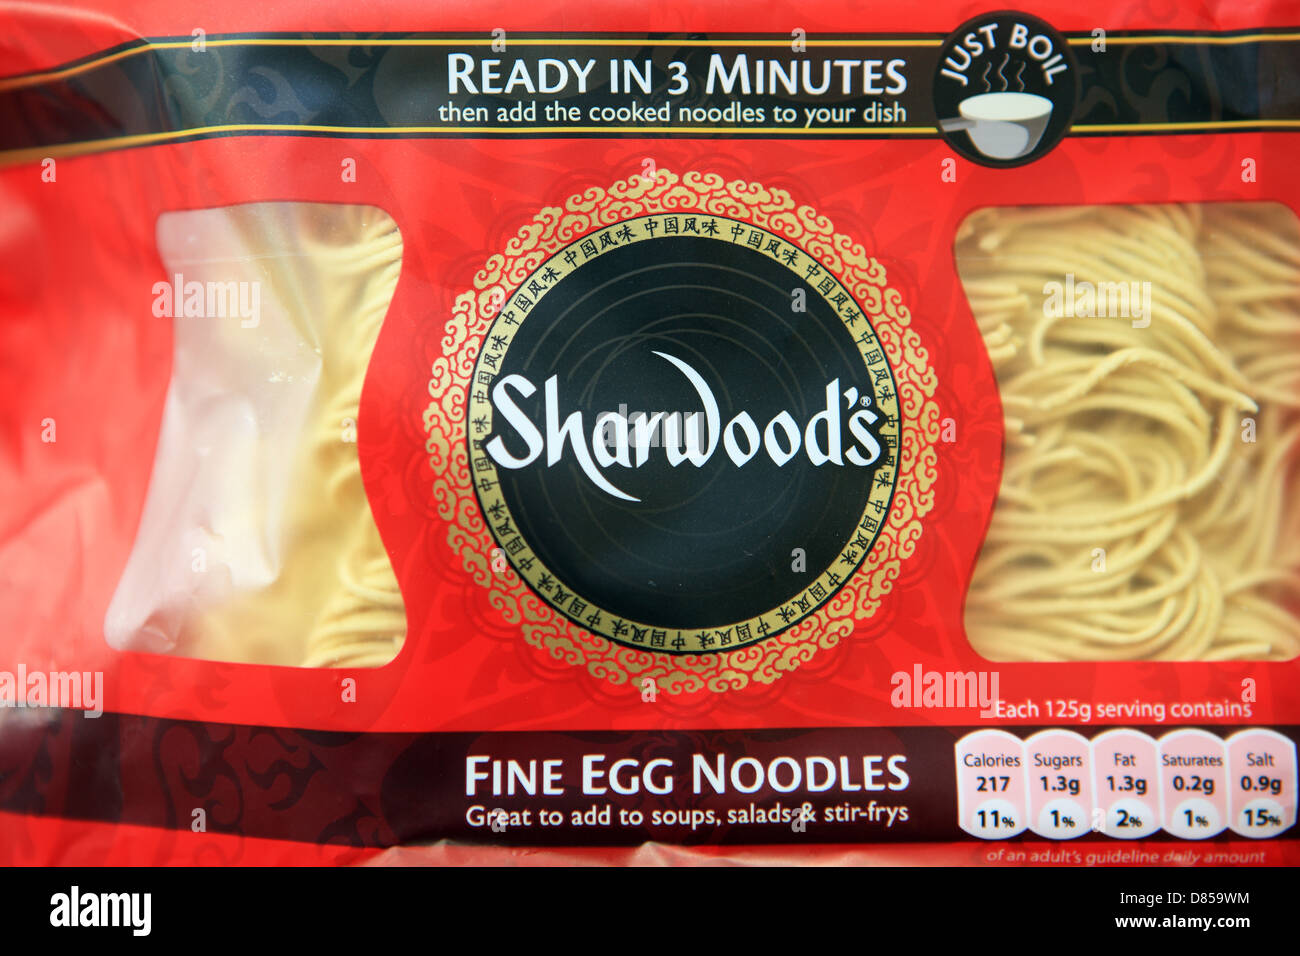 Packet of Sharwood's fine egg noodles which are ready in 3 minutes Stock  Photo - Alamy